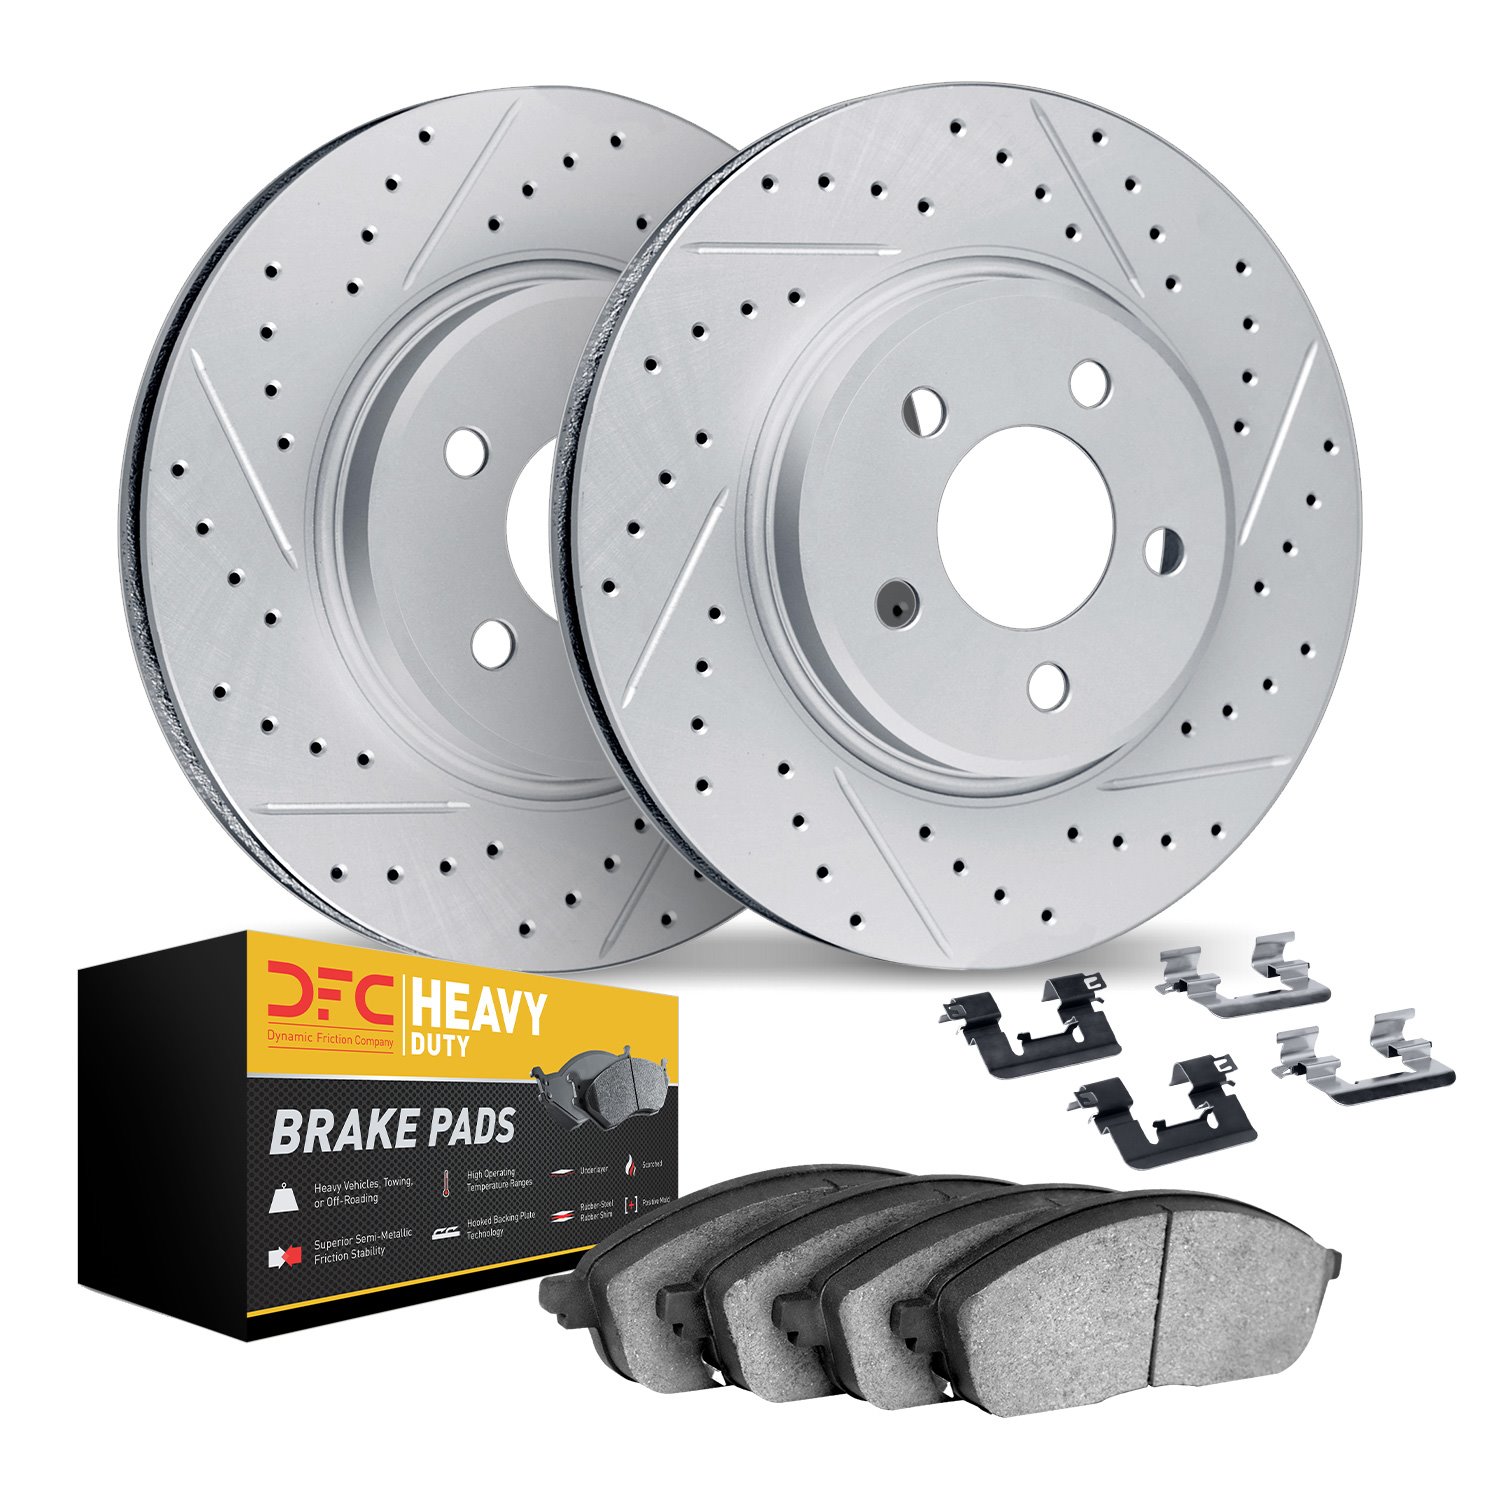 2212-99197 Geoperformance Drilled/Slotted Rotors w/Heavy-Duty Pads Kit & Hardware, 2015-2019 Ford/Lincoln/Mercury/Mazda, Positio